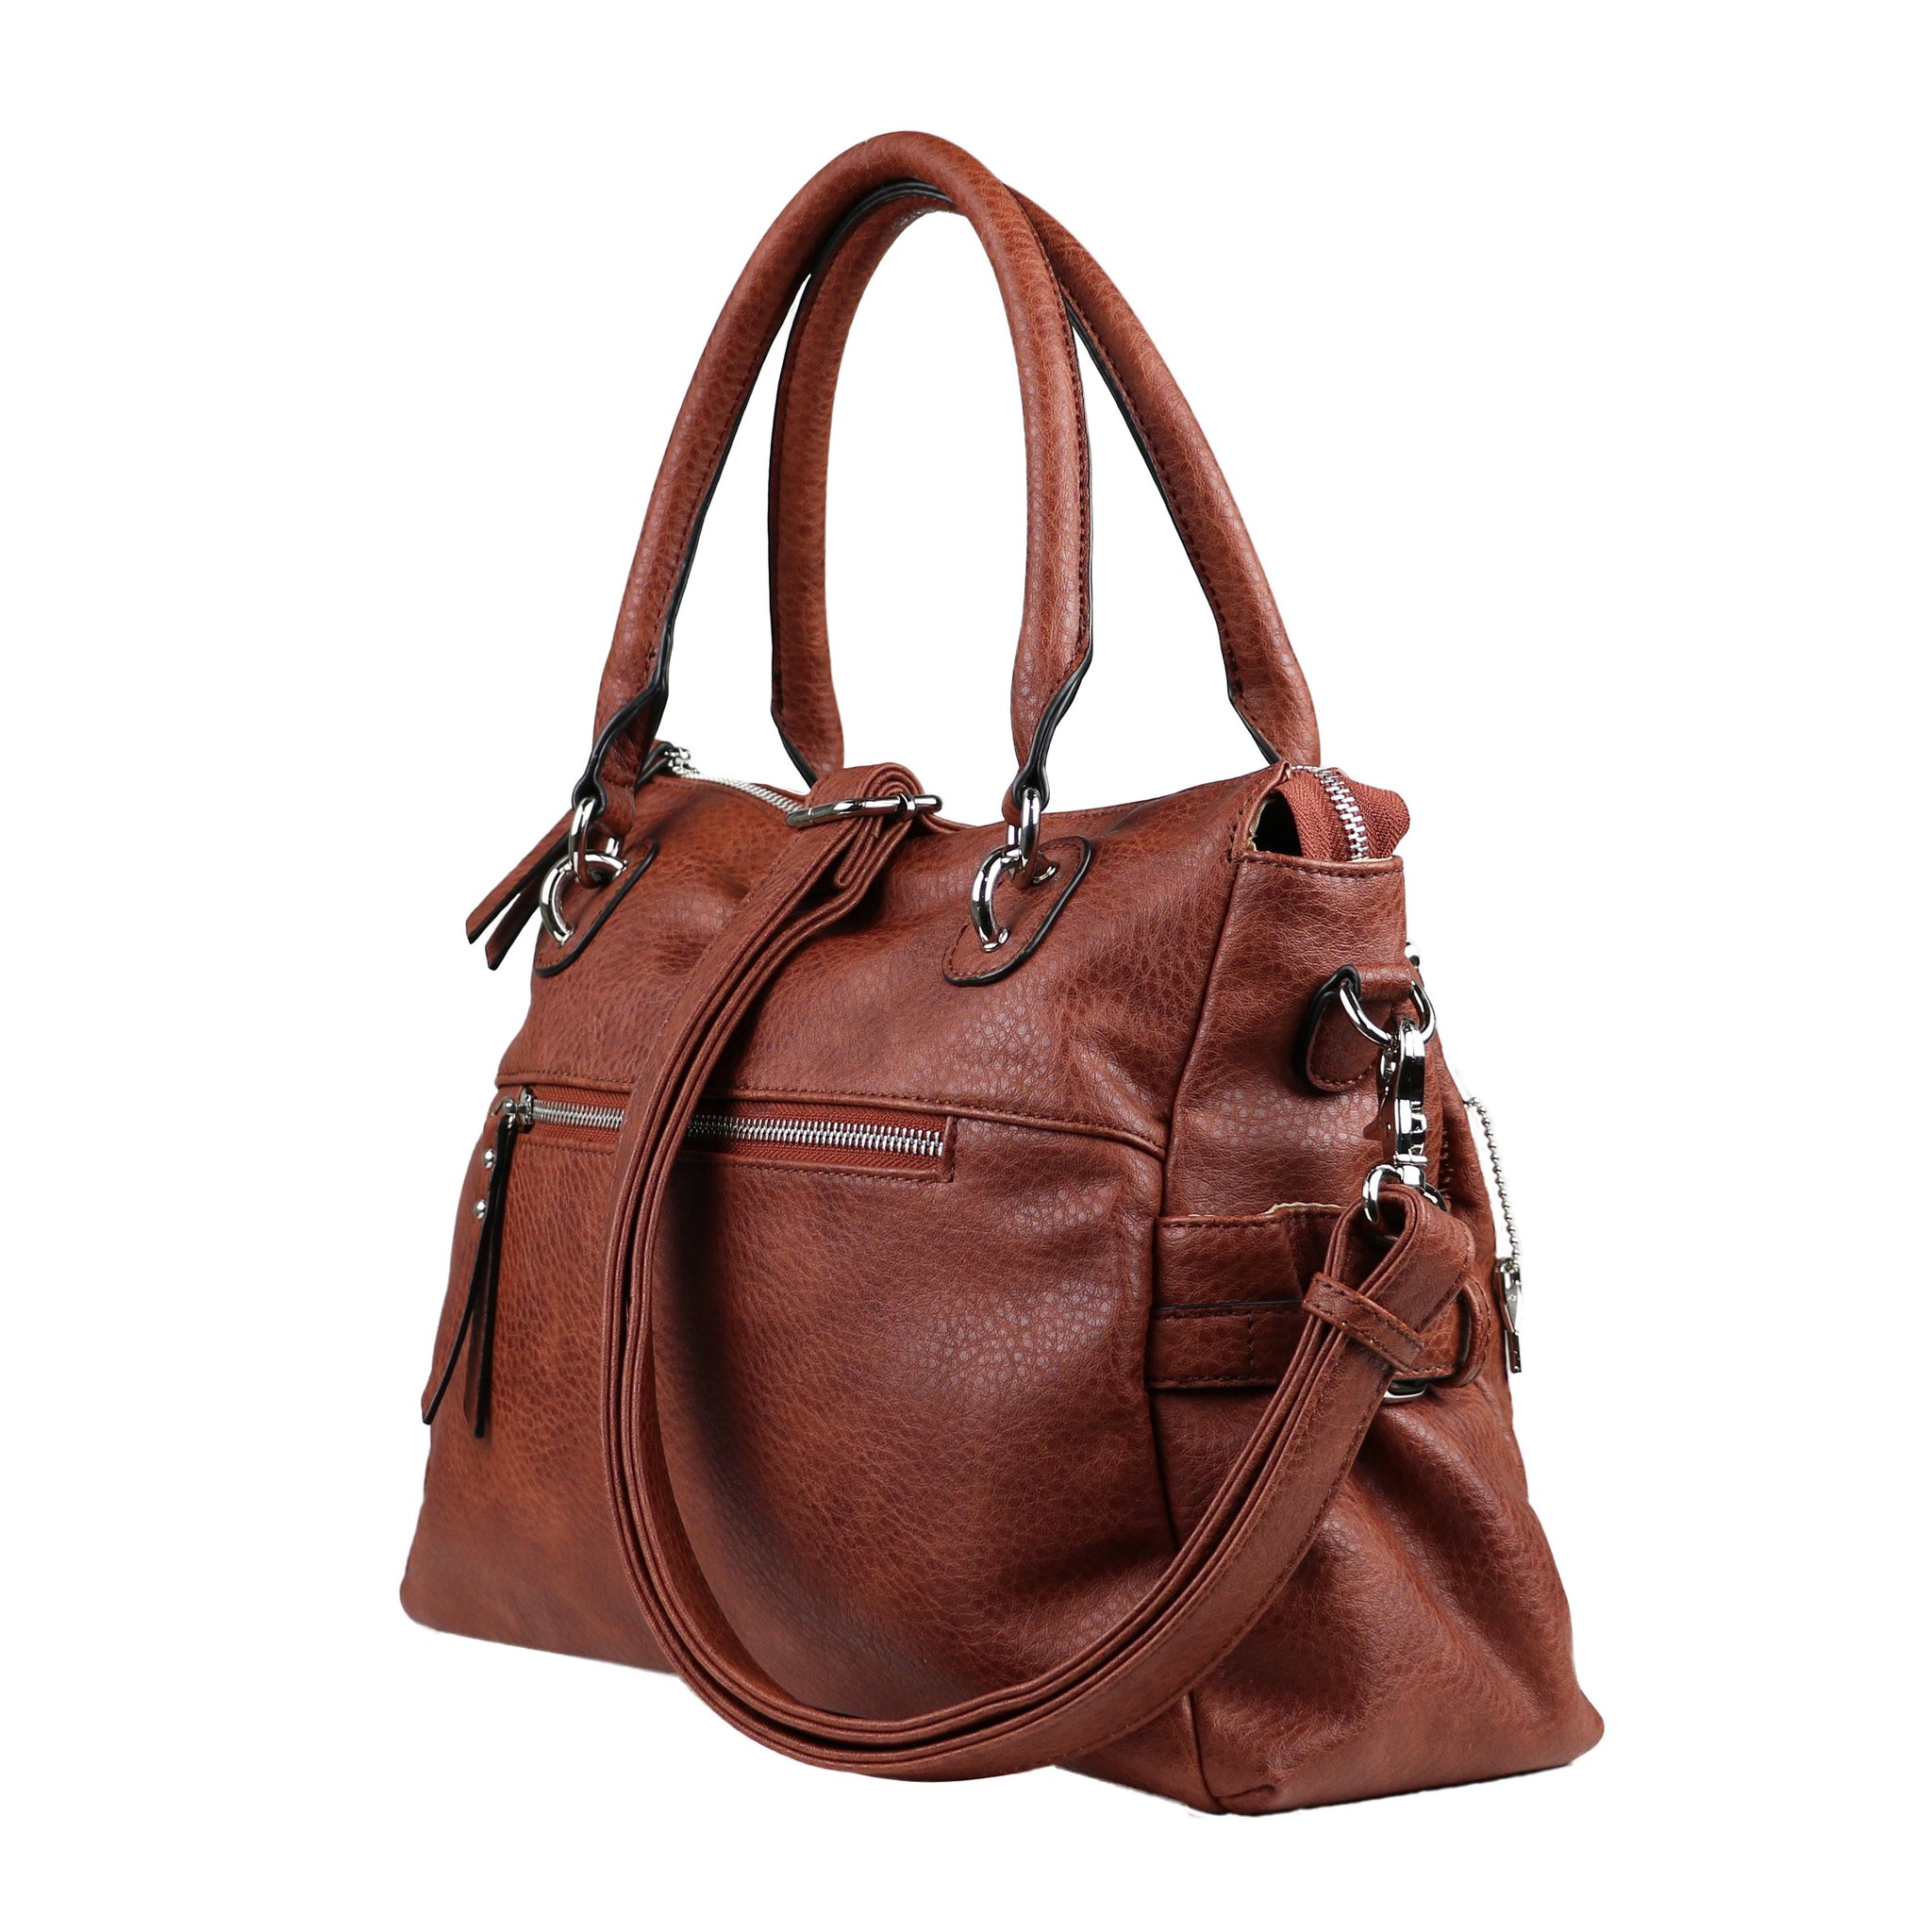 Jessica Satchel – Mama Bear's Concealed Carry